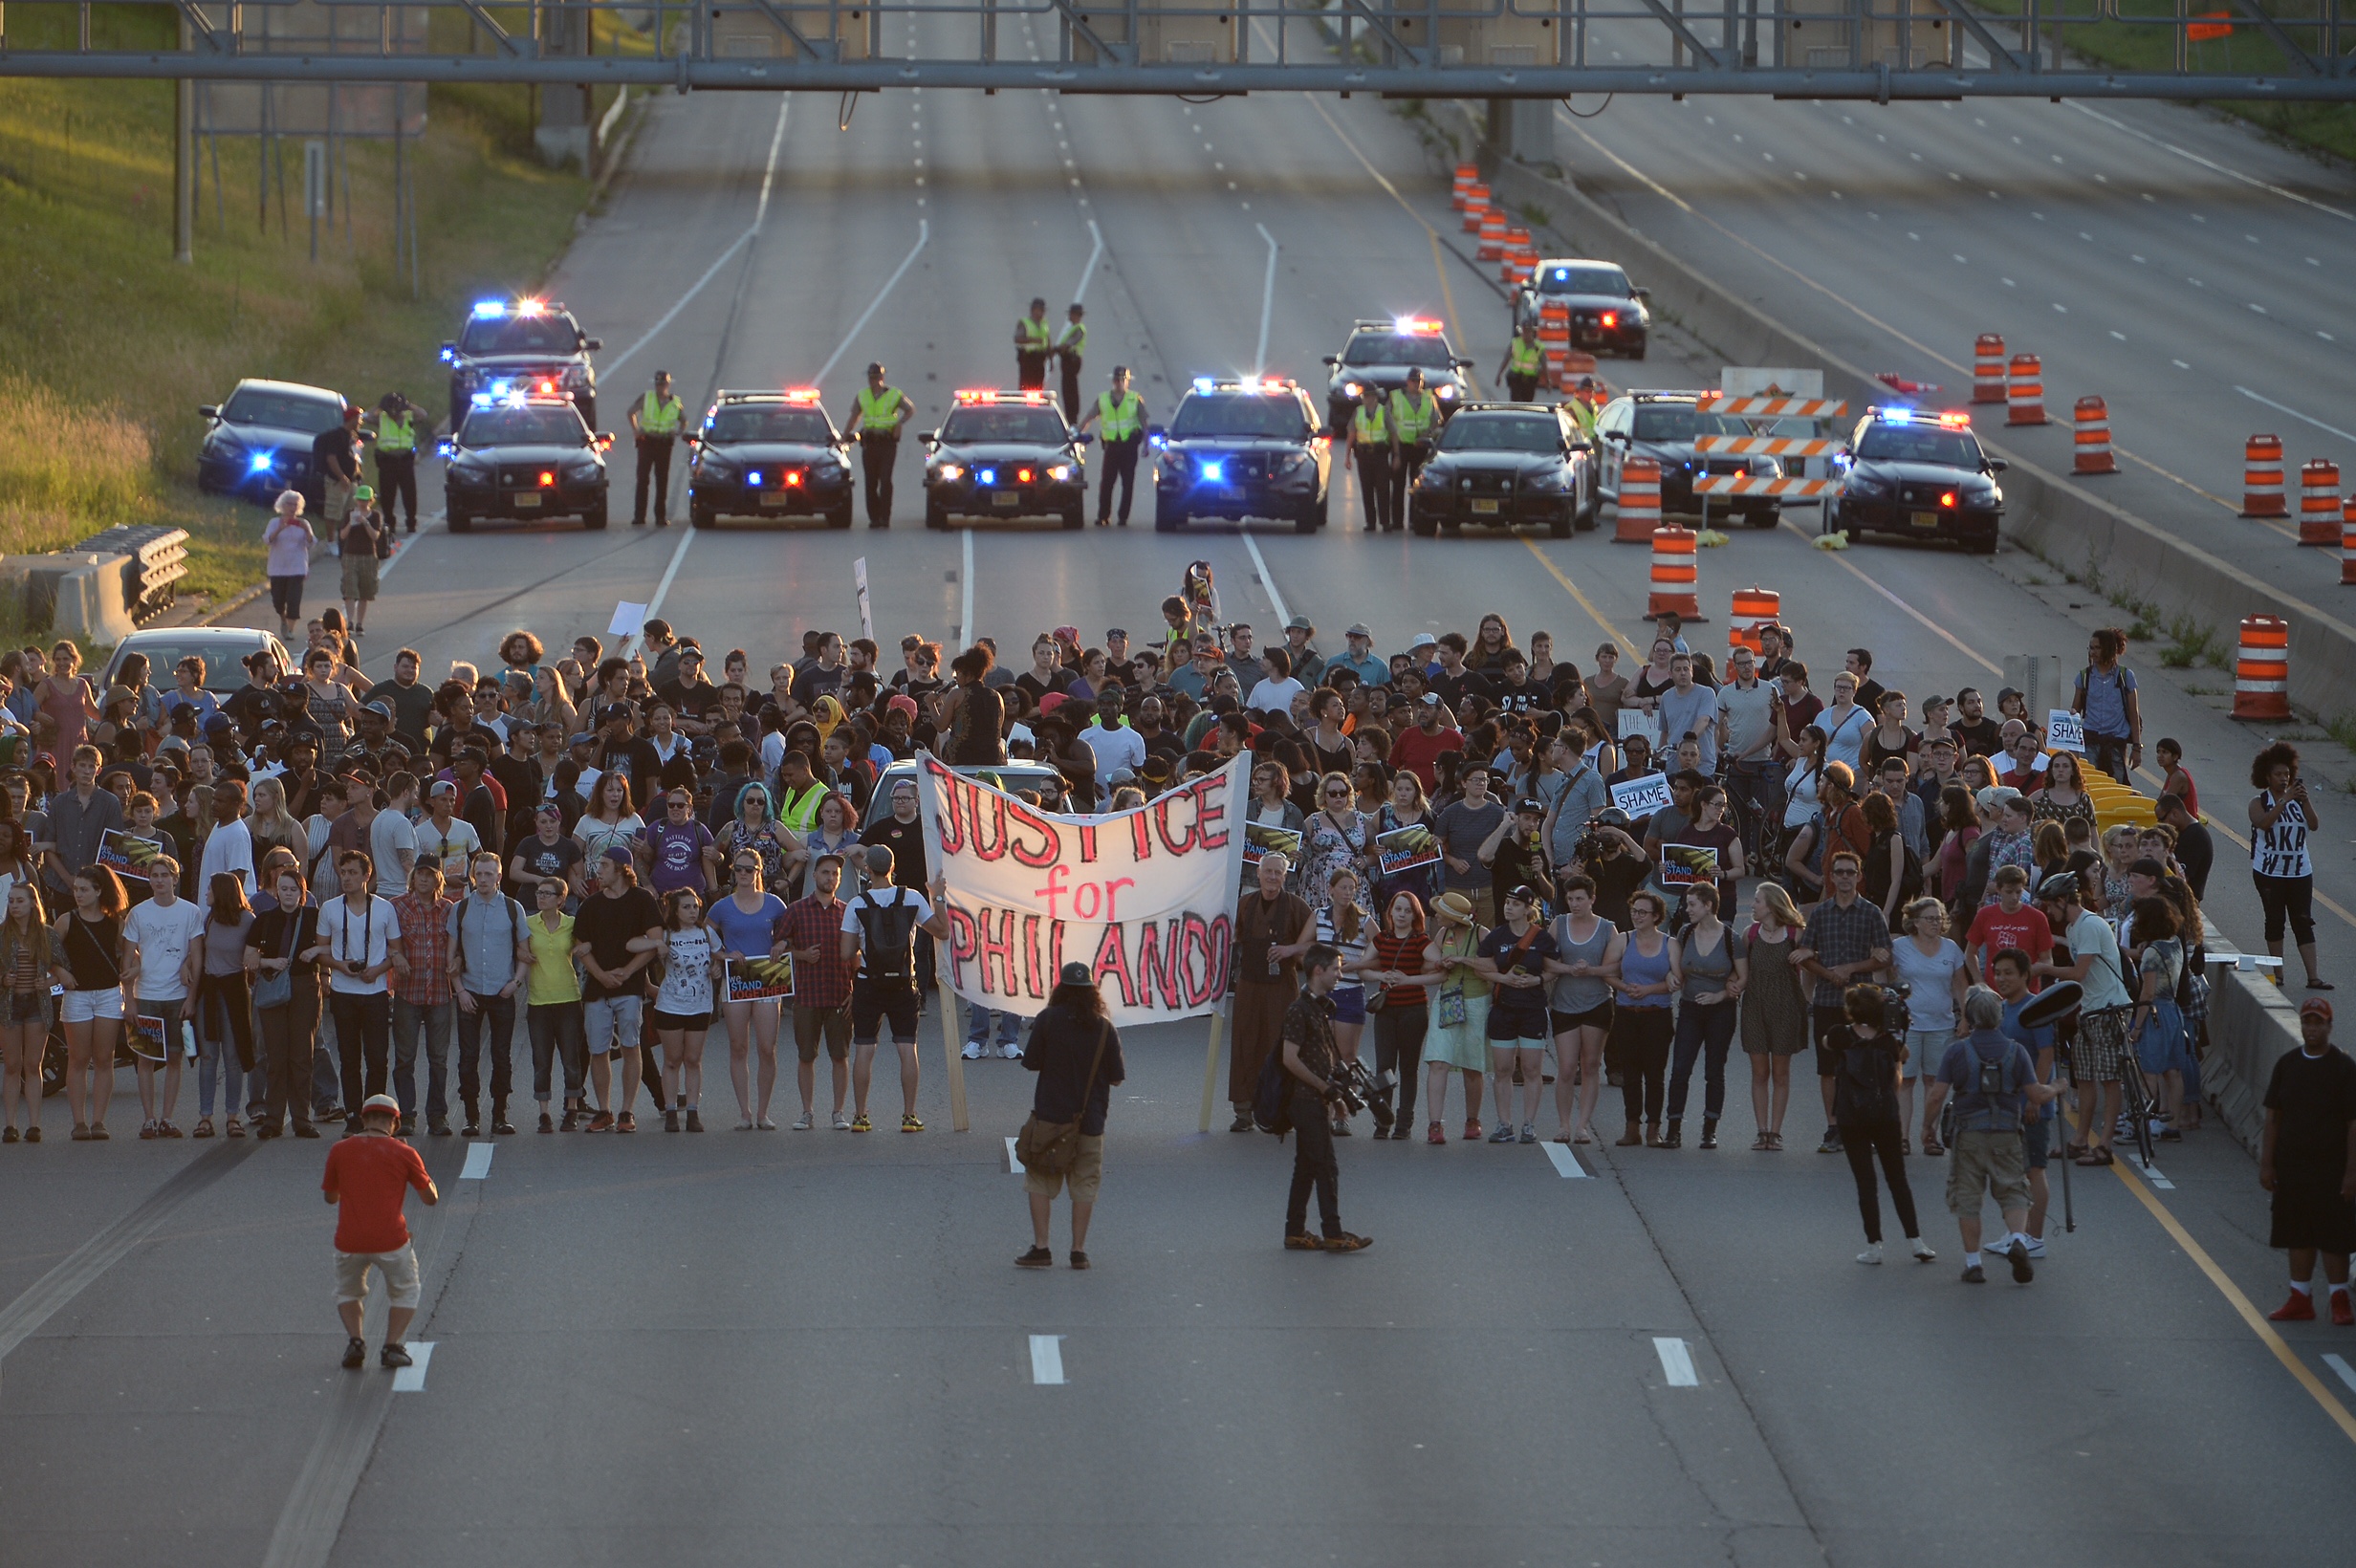 PHOTO: Marchers block part of Interstate 94 in St. Paul, Minnesota, July 9, 2016, during a protest sparked by the recent police killings of black men in Minnesota and Louisiana. 